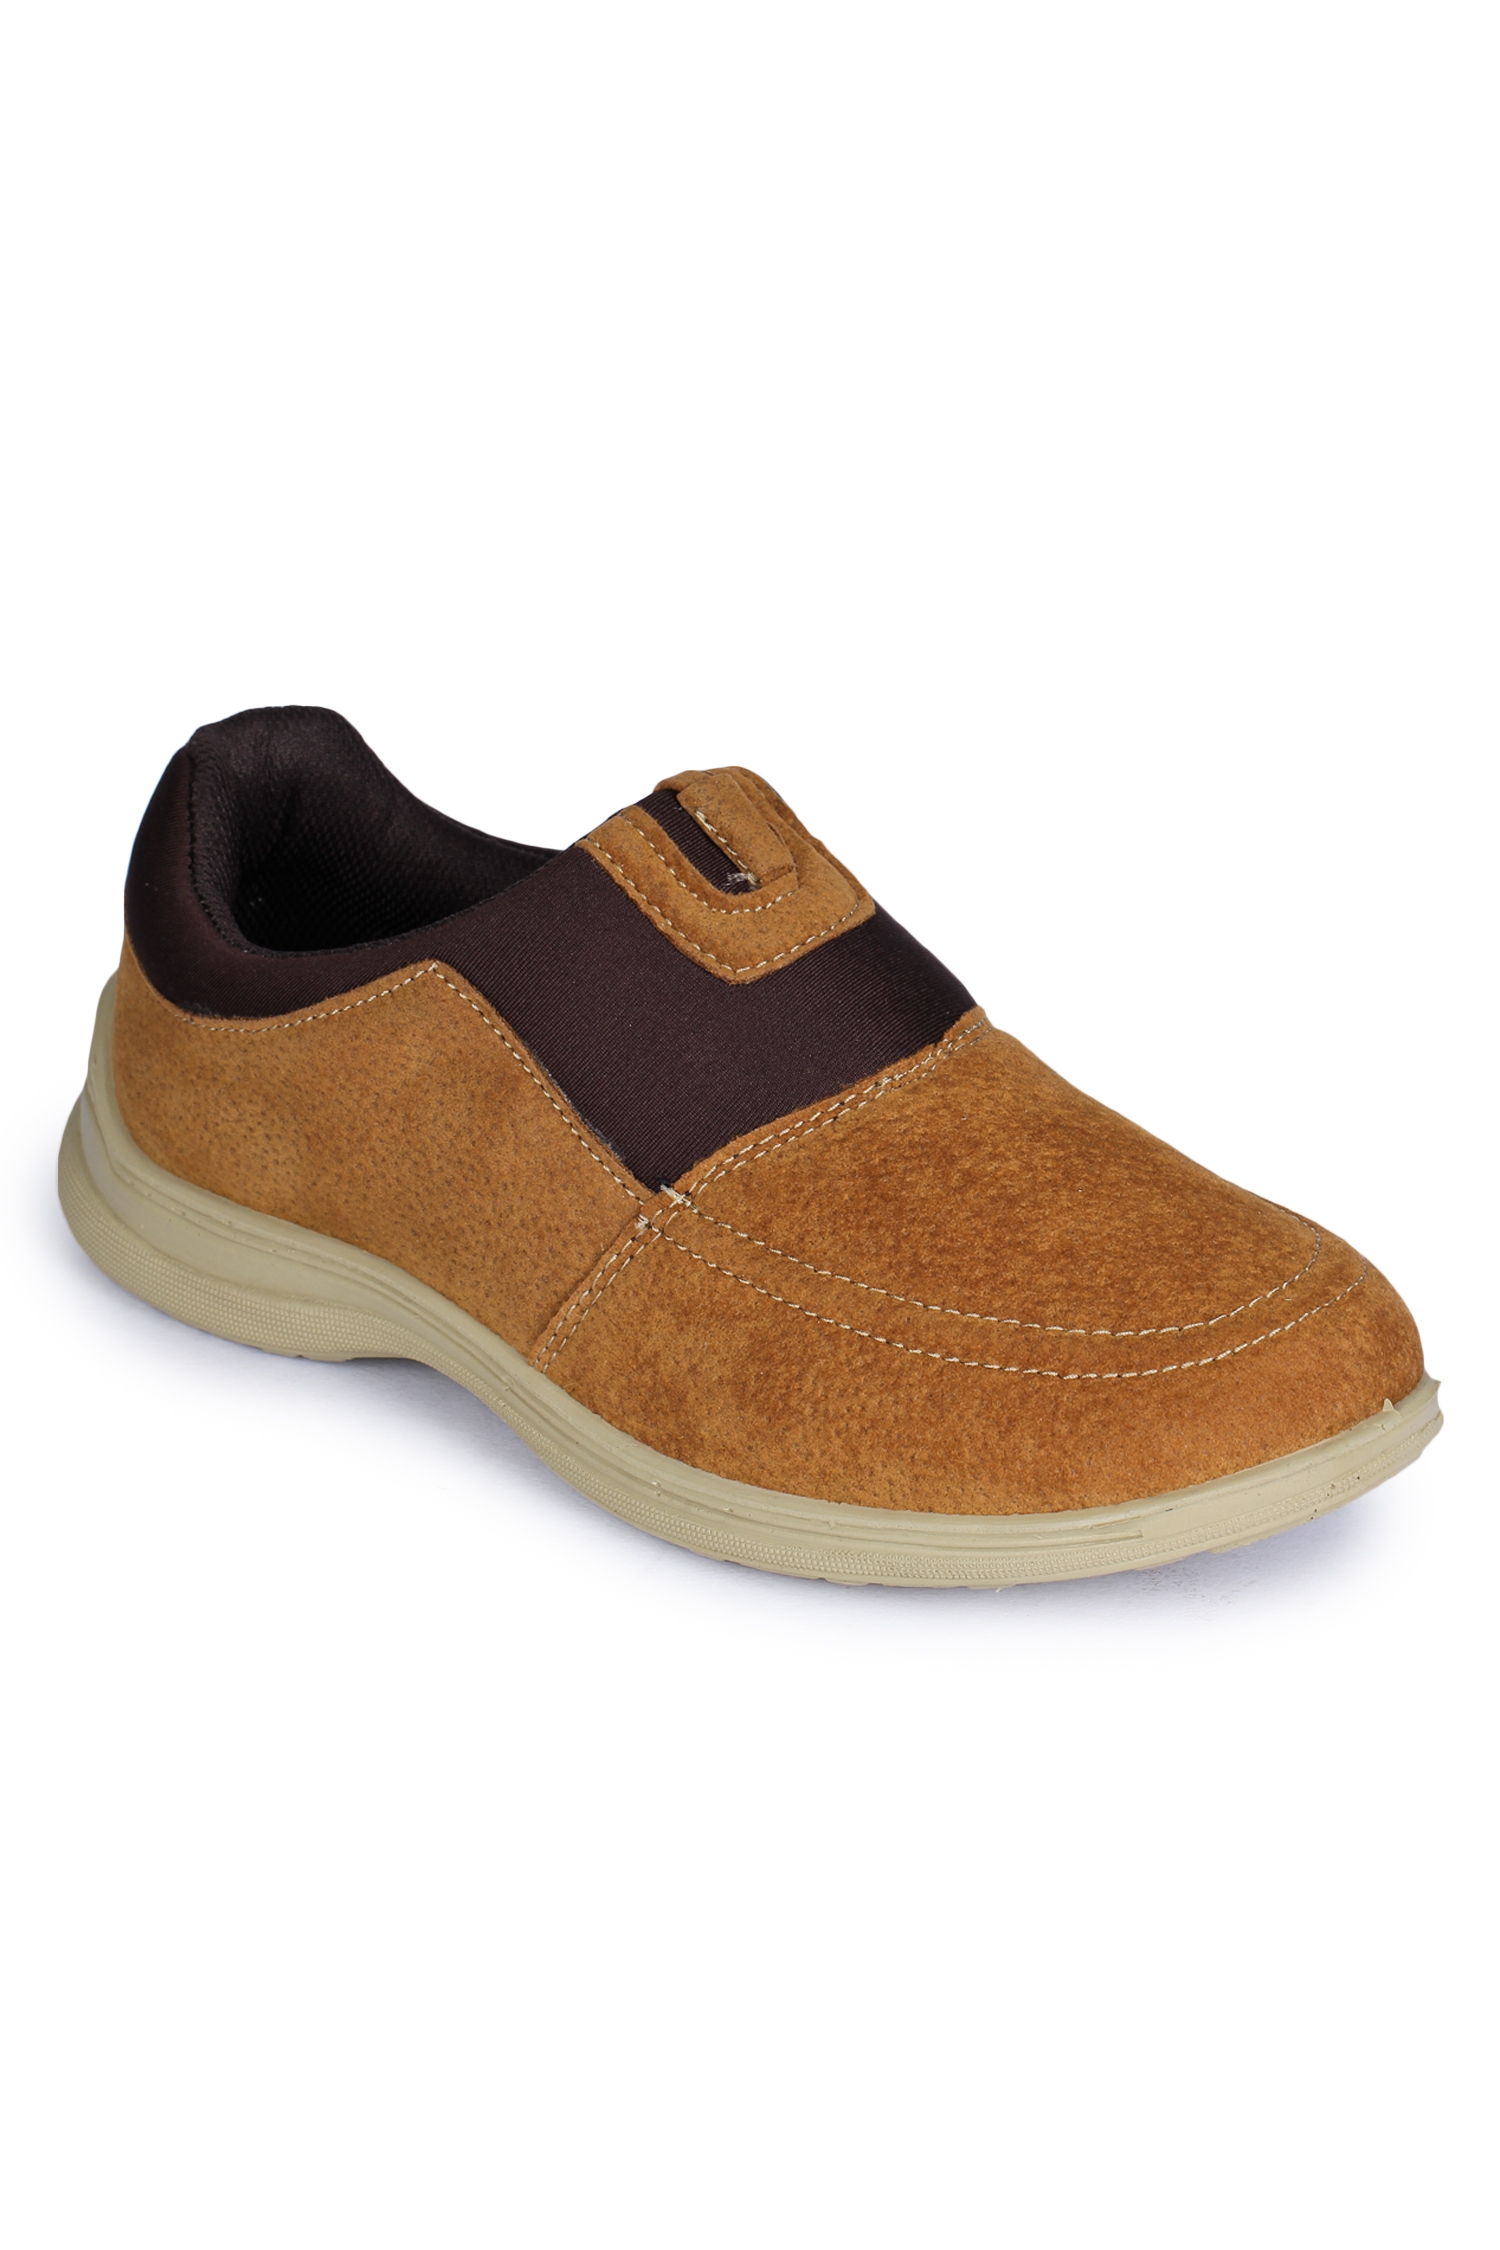 Liberty | Liberty Force 10 Brown Casual Slip-ons STEPHEN-22_Brown For - Men